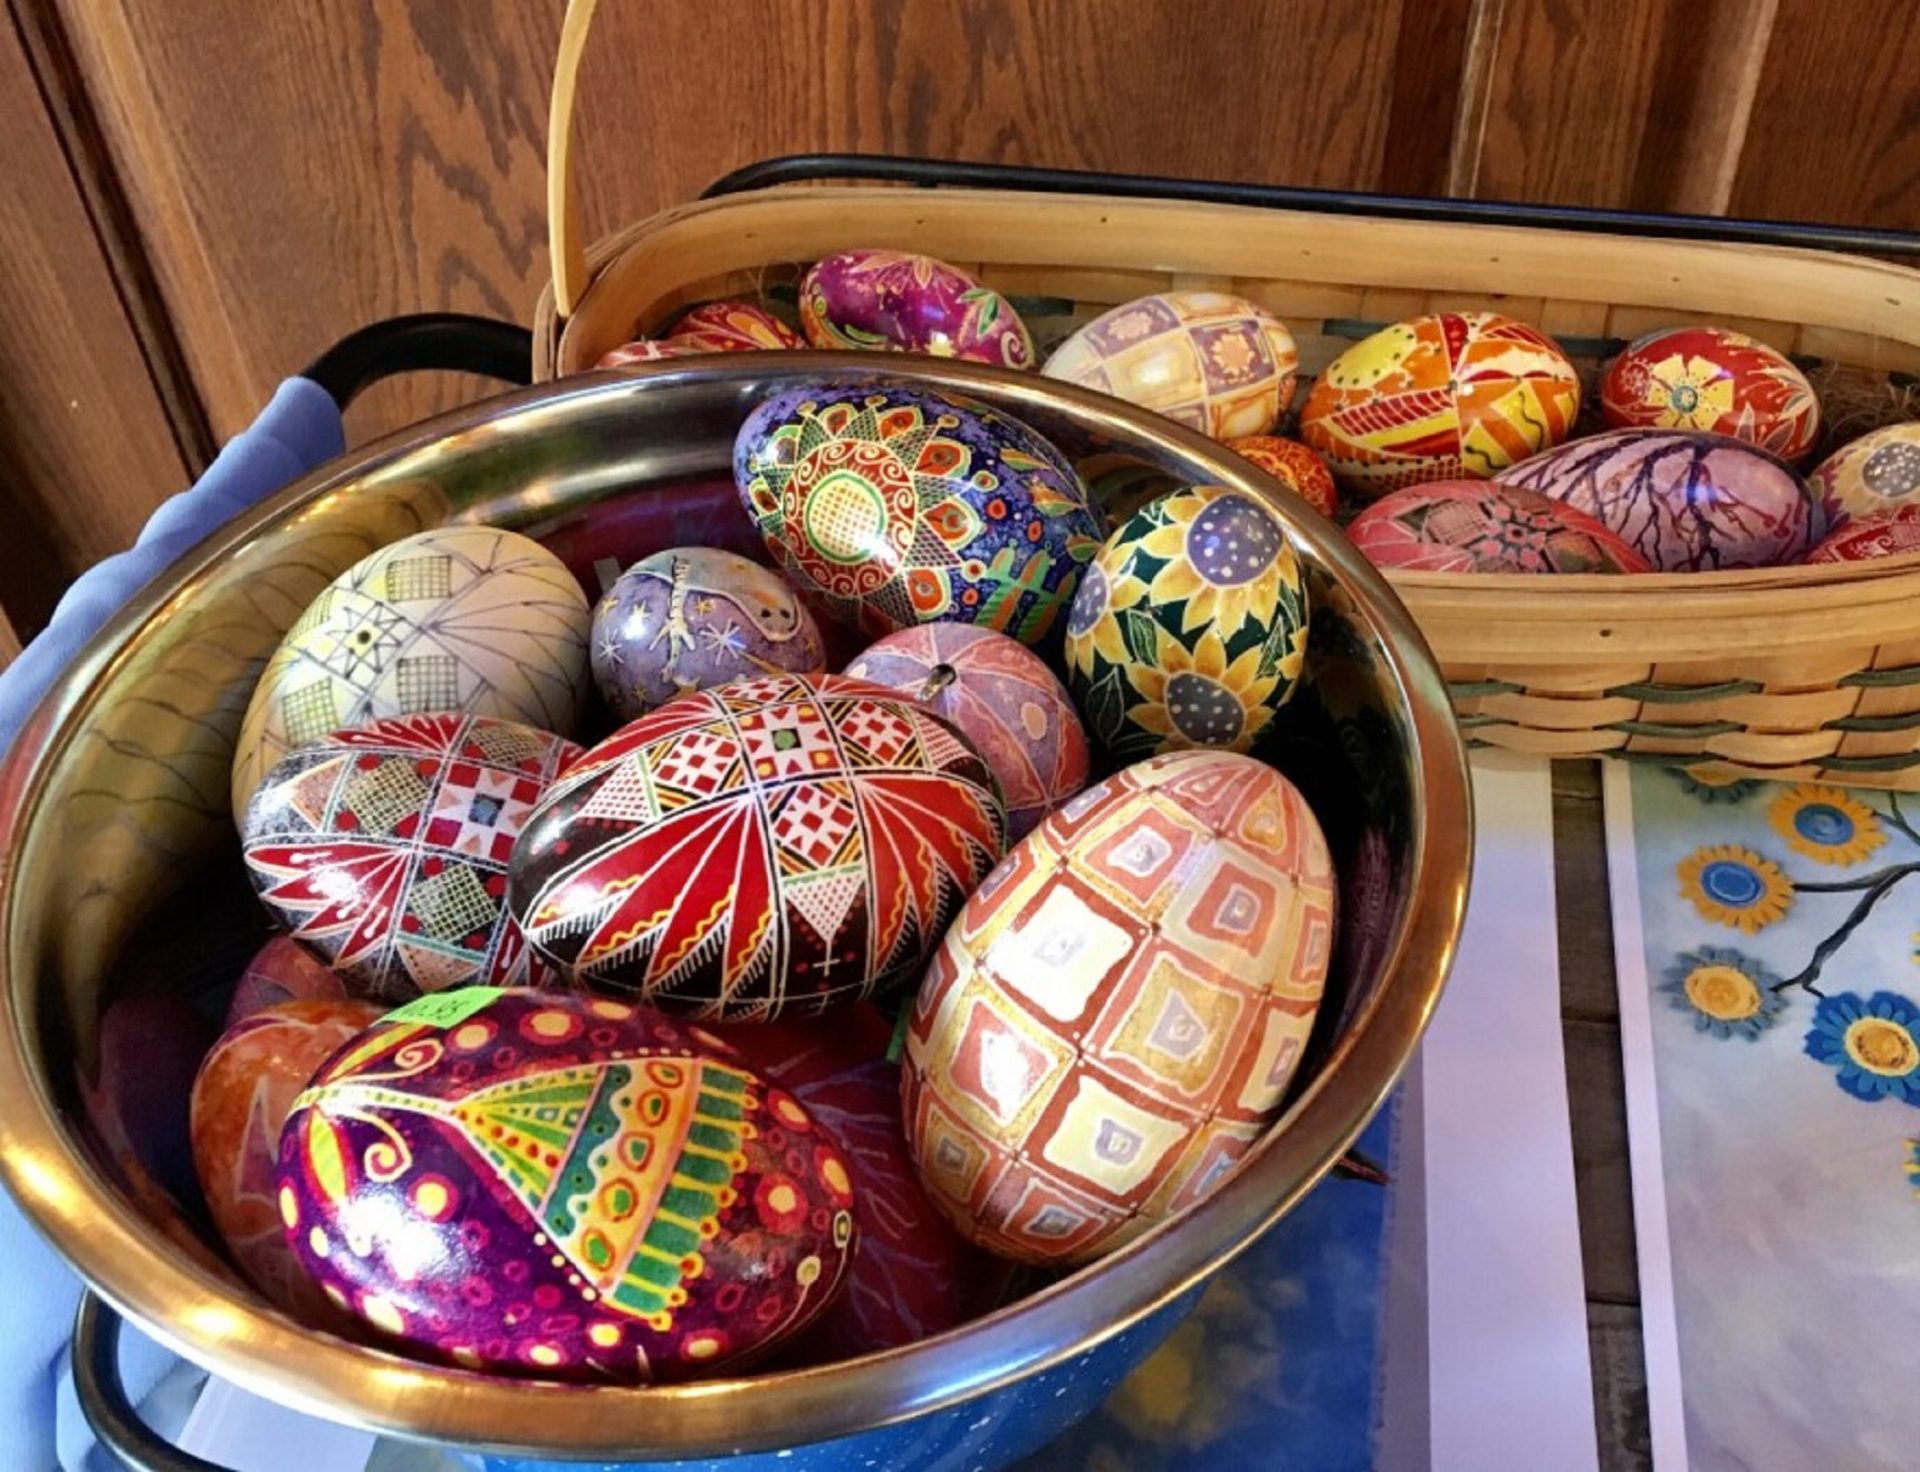 Some of the hand-dyed Pysanky or Ukrainian Easter eggs Olga Snyder, an artist who is originally from Ukraine, showed in Olga Gallery, Cafe & Bistro that she and her husband, John, run in Coudersport.